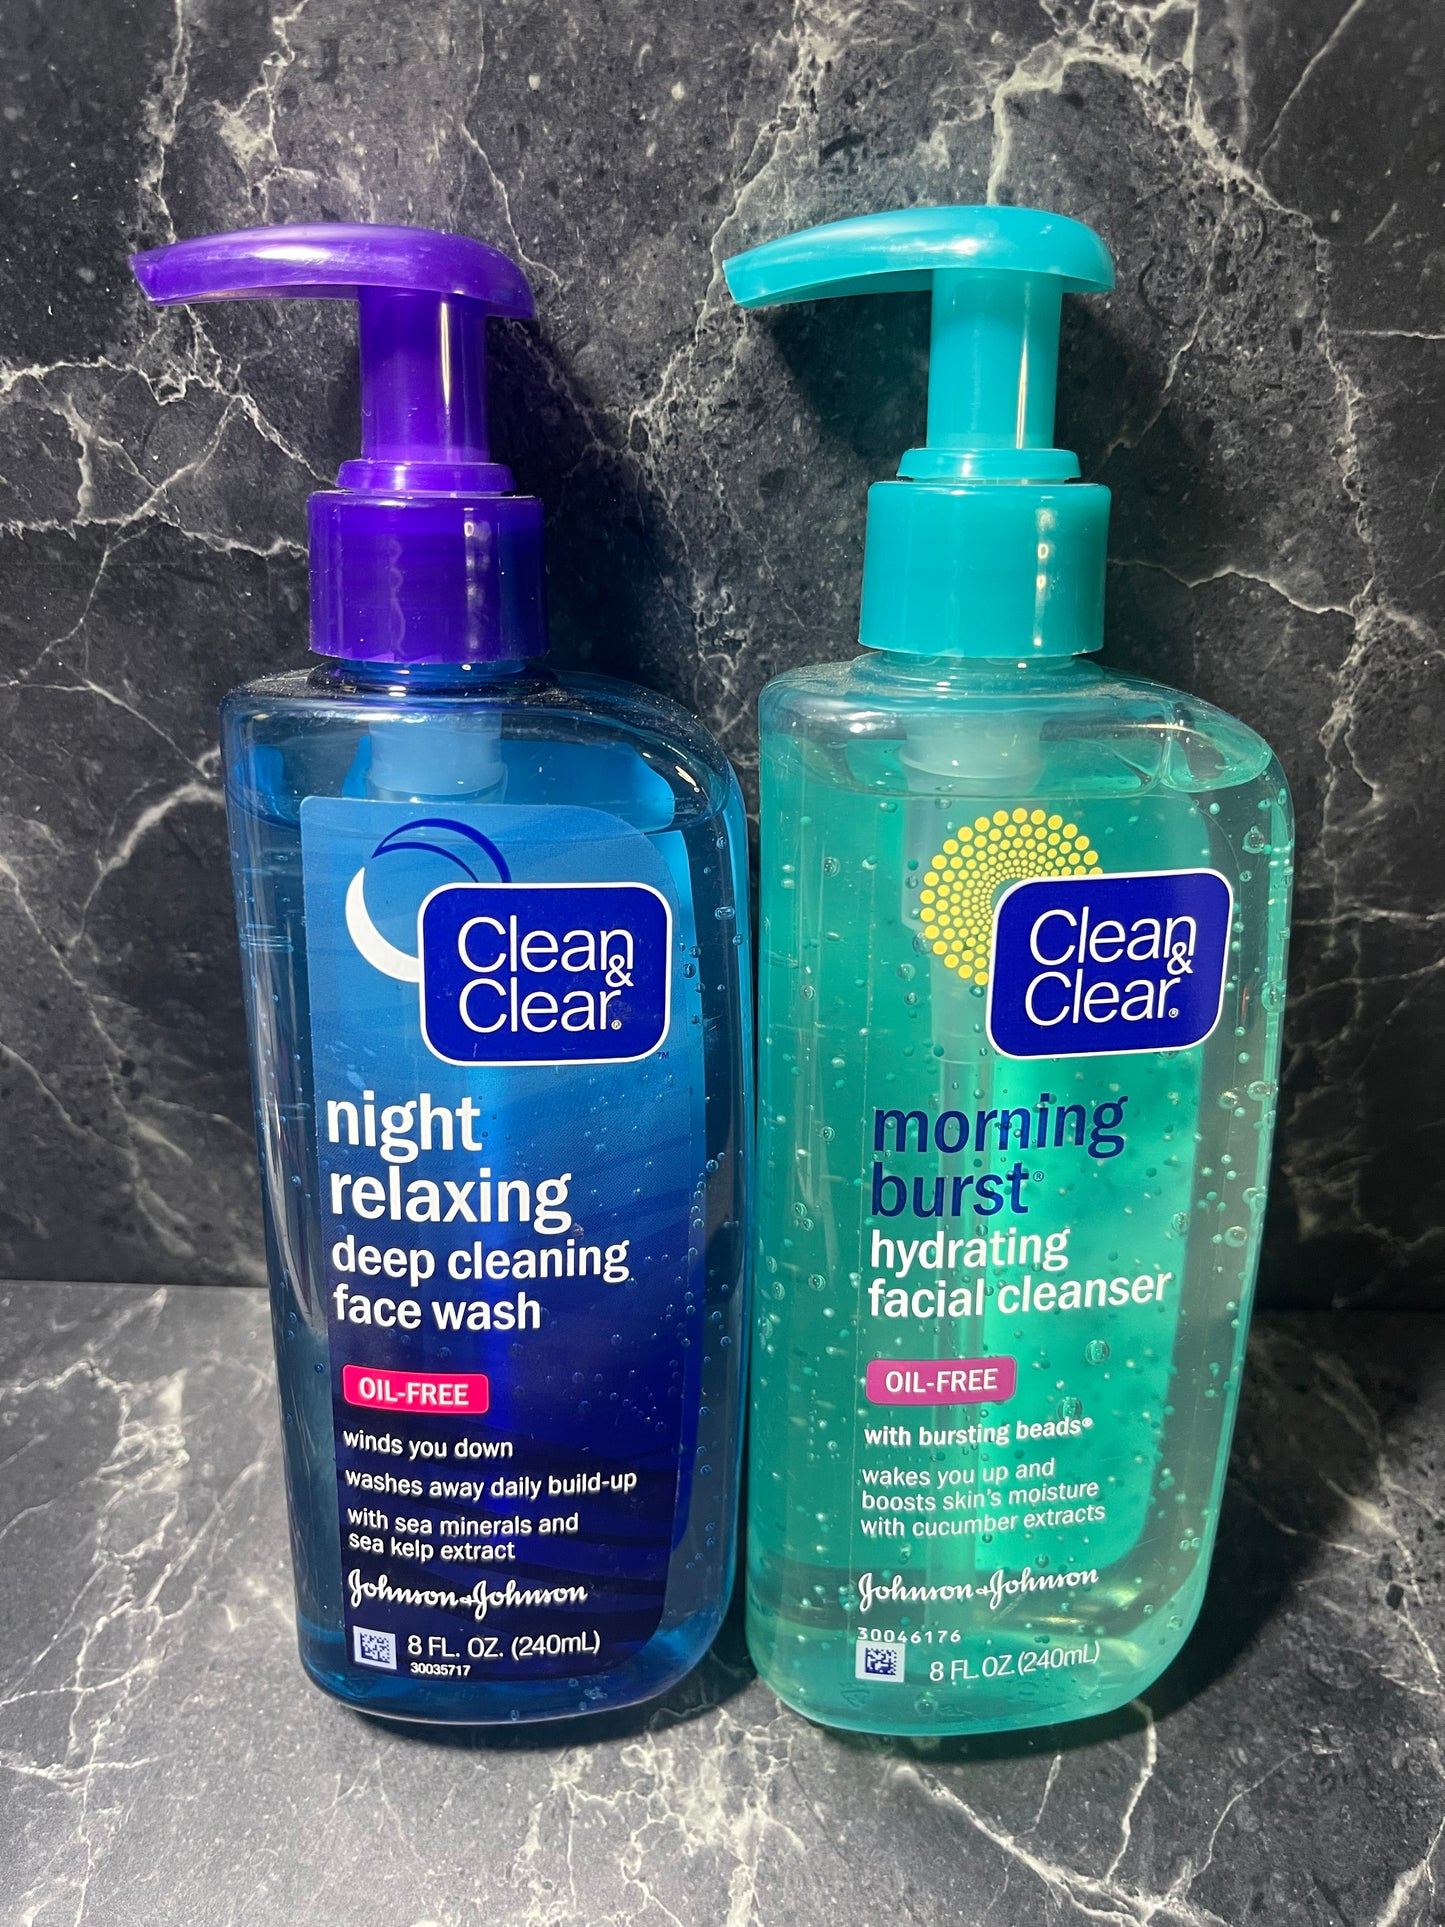 Clean & Clear Morning Burst Hydrating Night Relaxing Facial Cleansers Skin